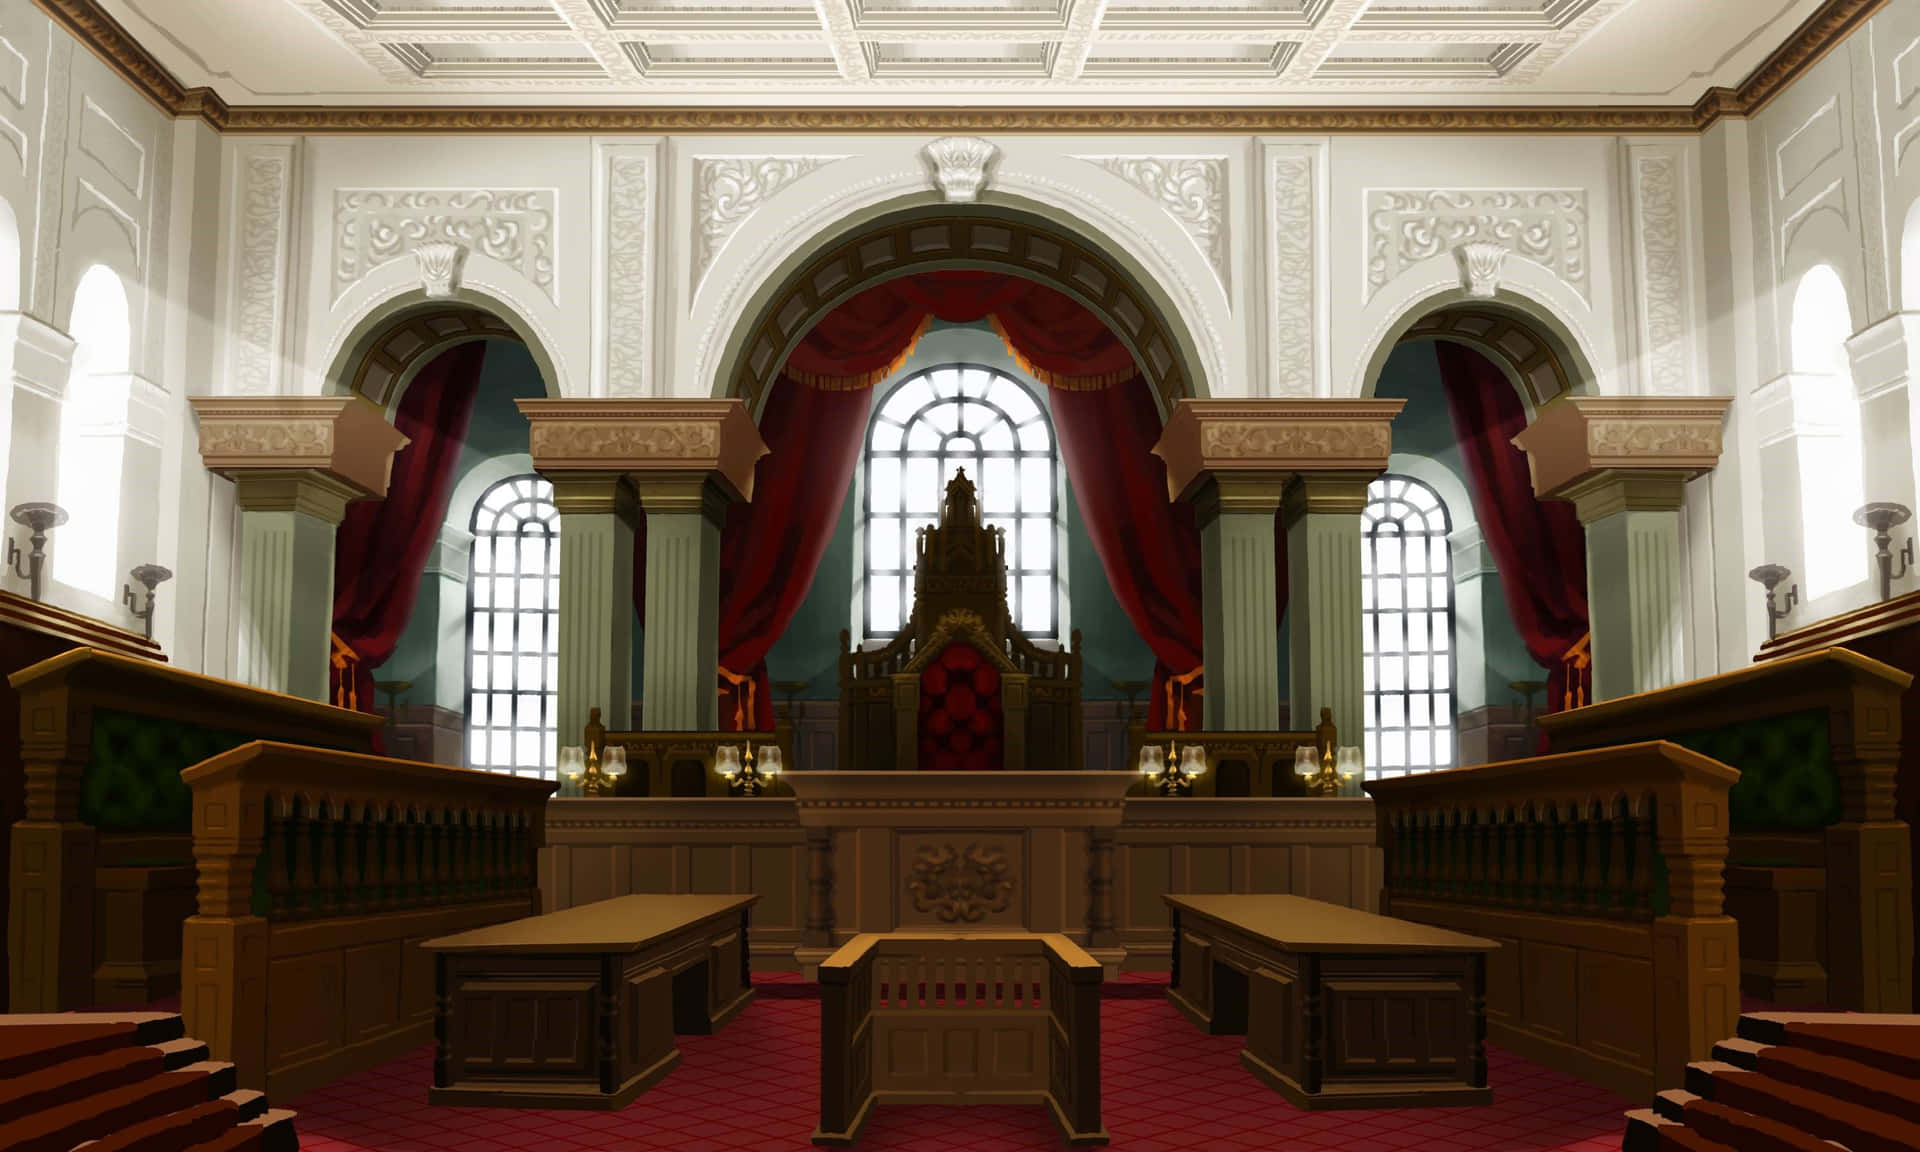 A stunning, high-resolution image of an elegant and modern courtroom interior